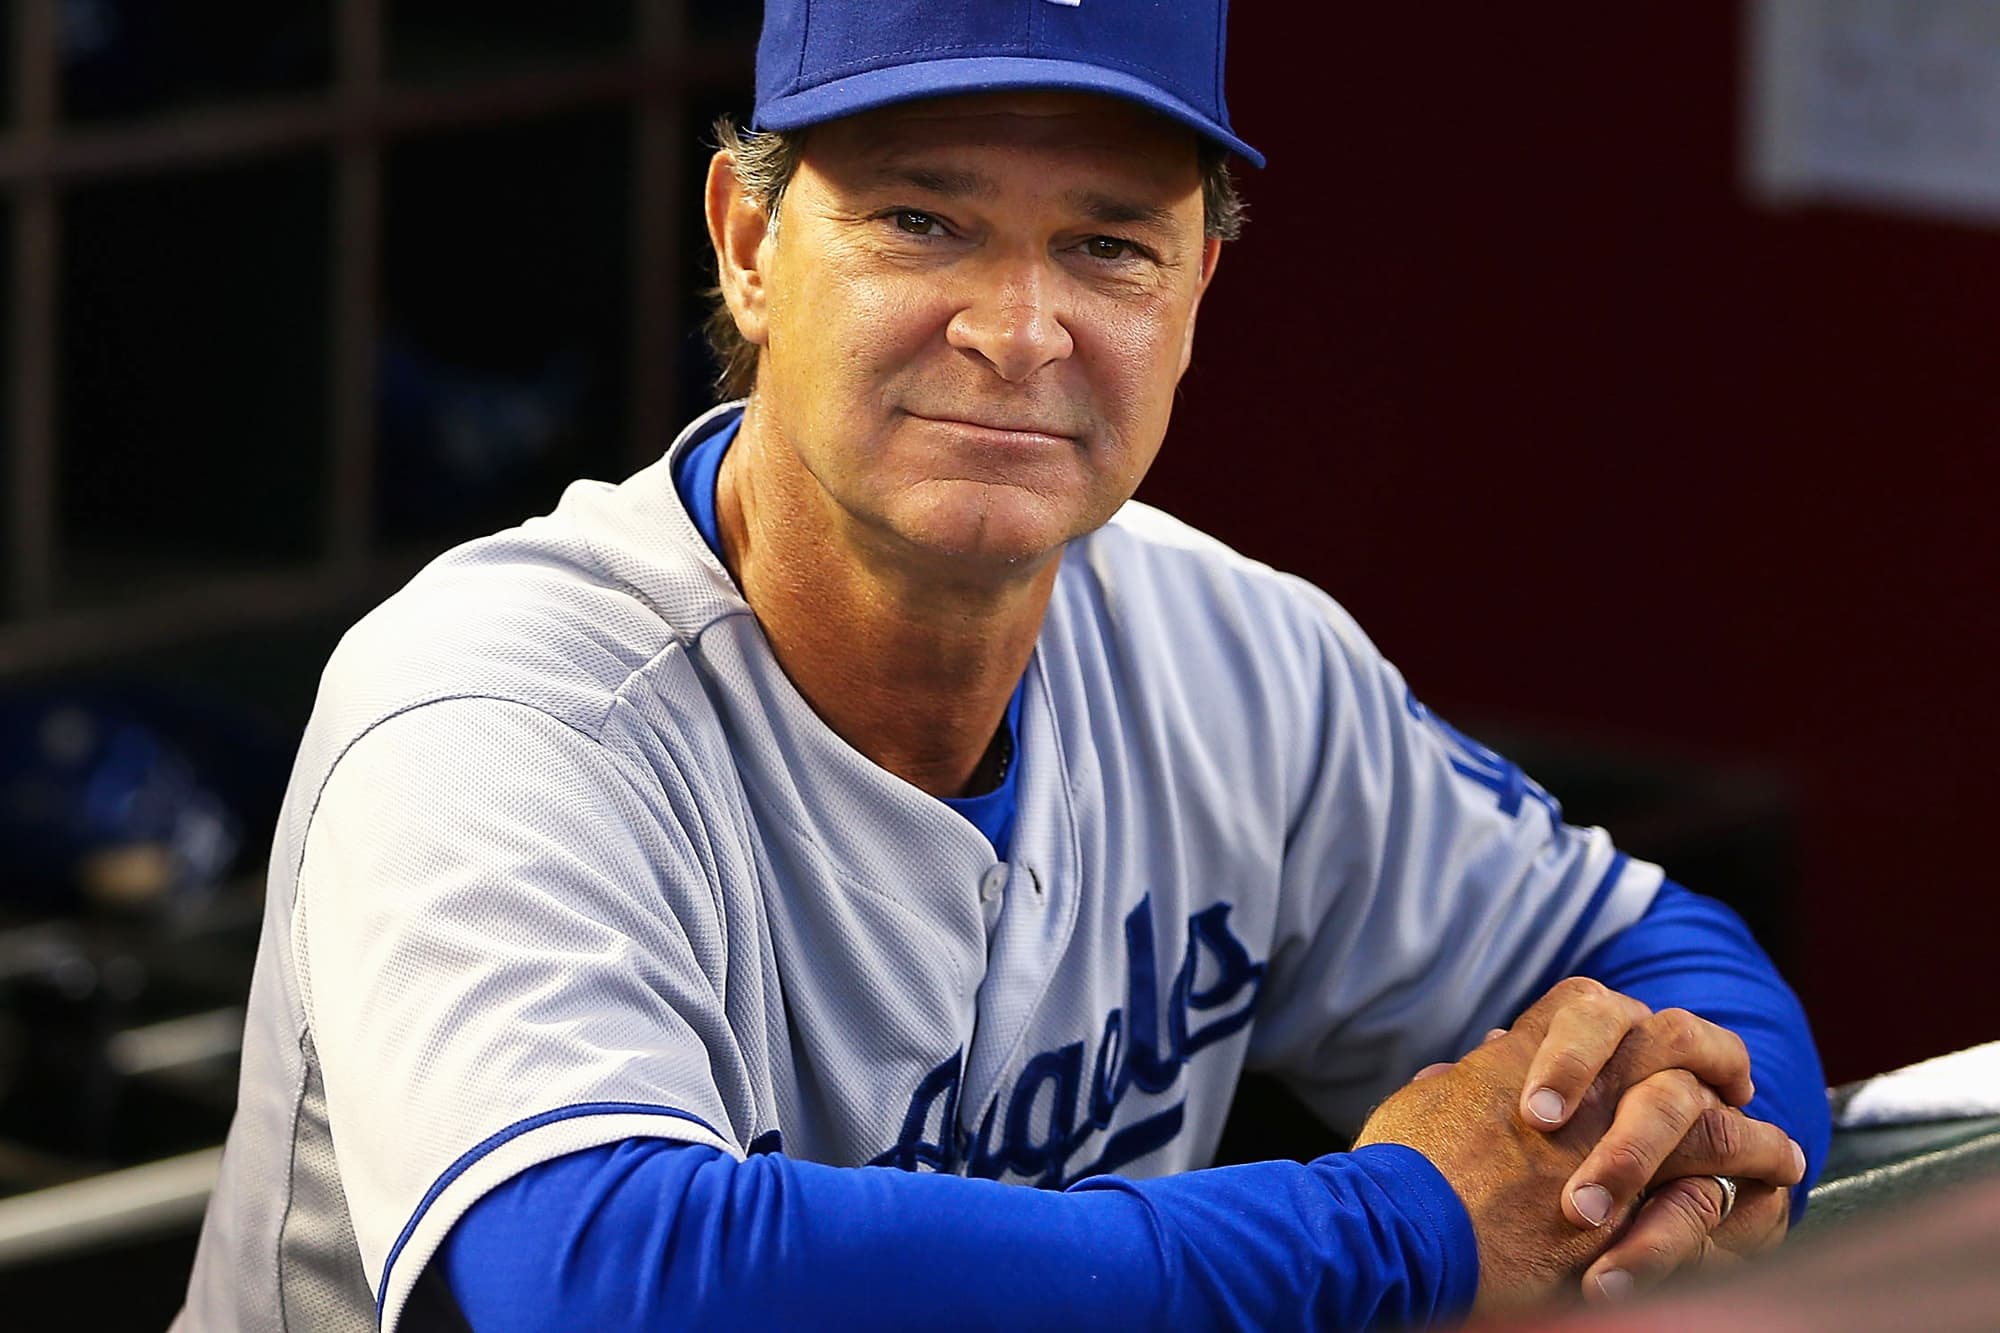 Donnie Baseball Mattingly on the rejuvenated Dodgers